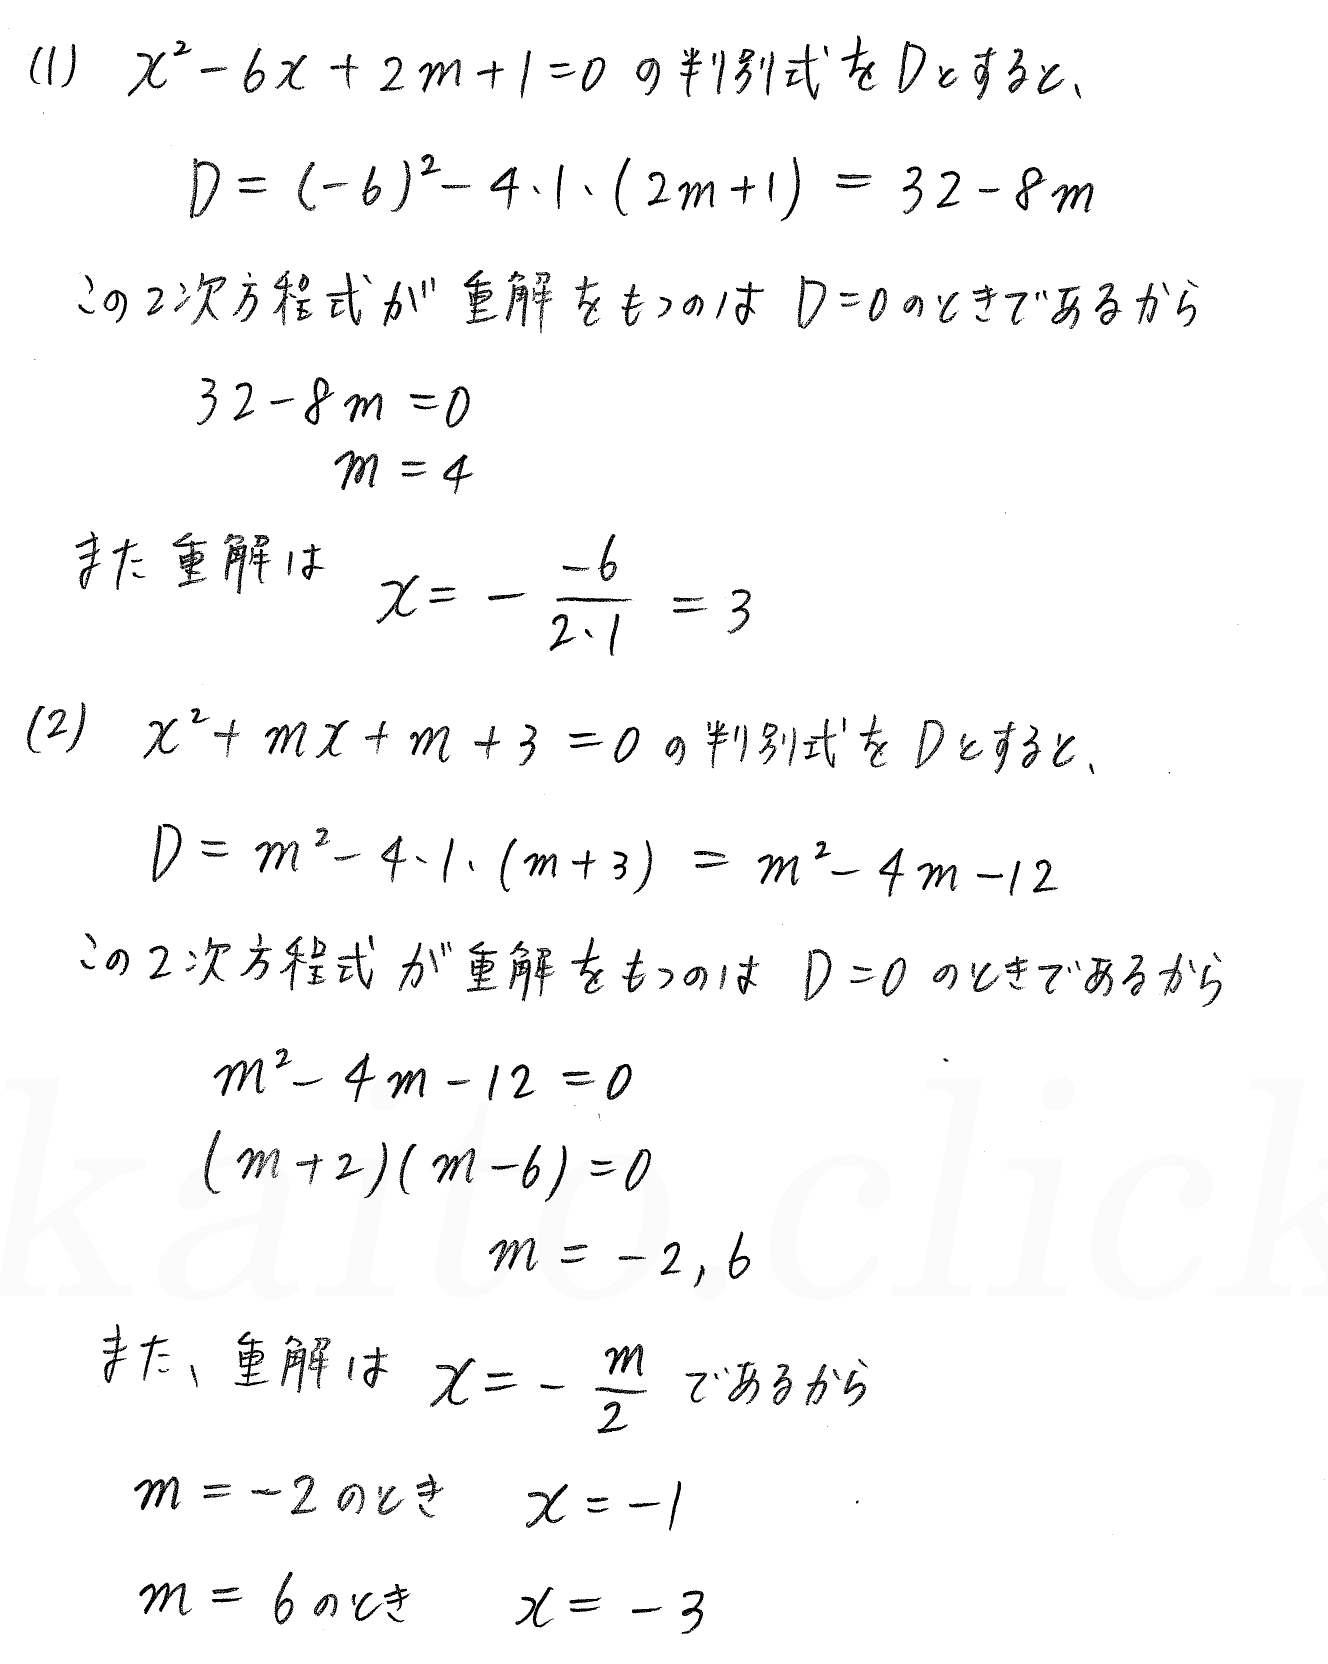 clear数学Ⅰ-226解答 